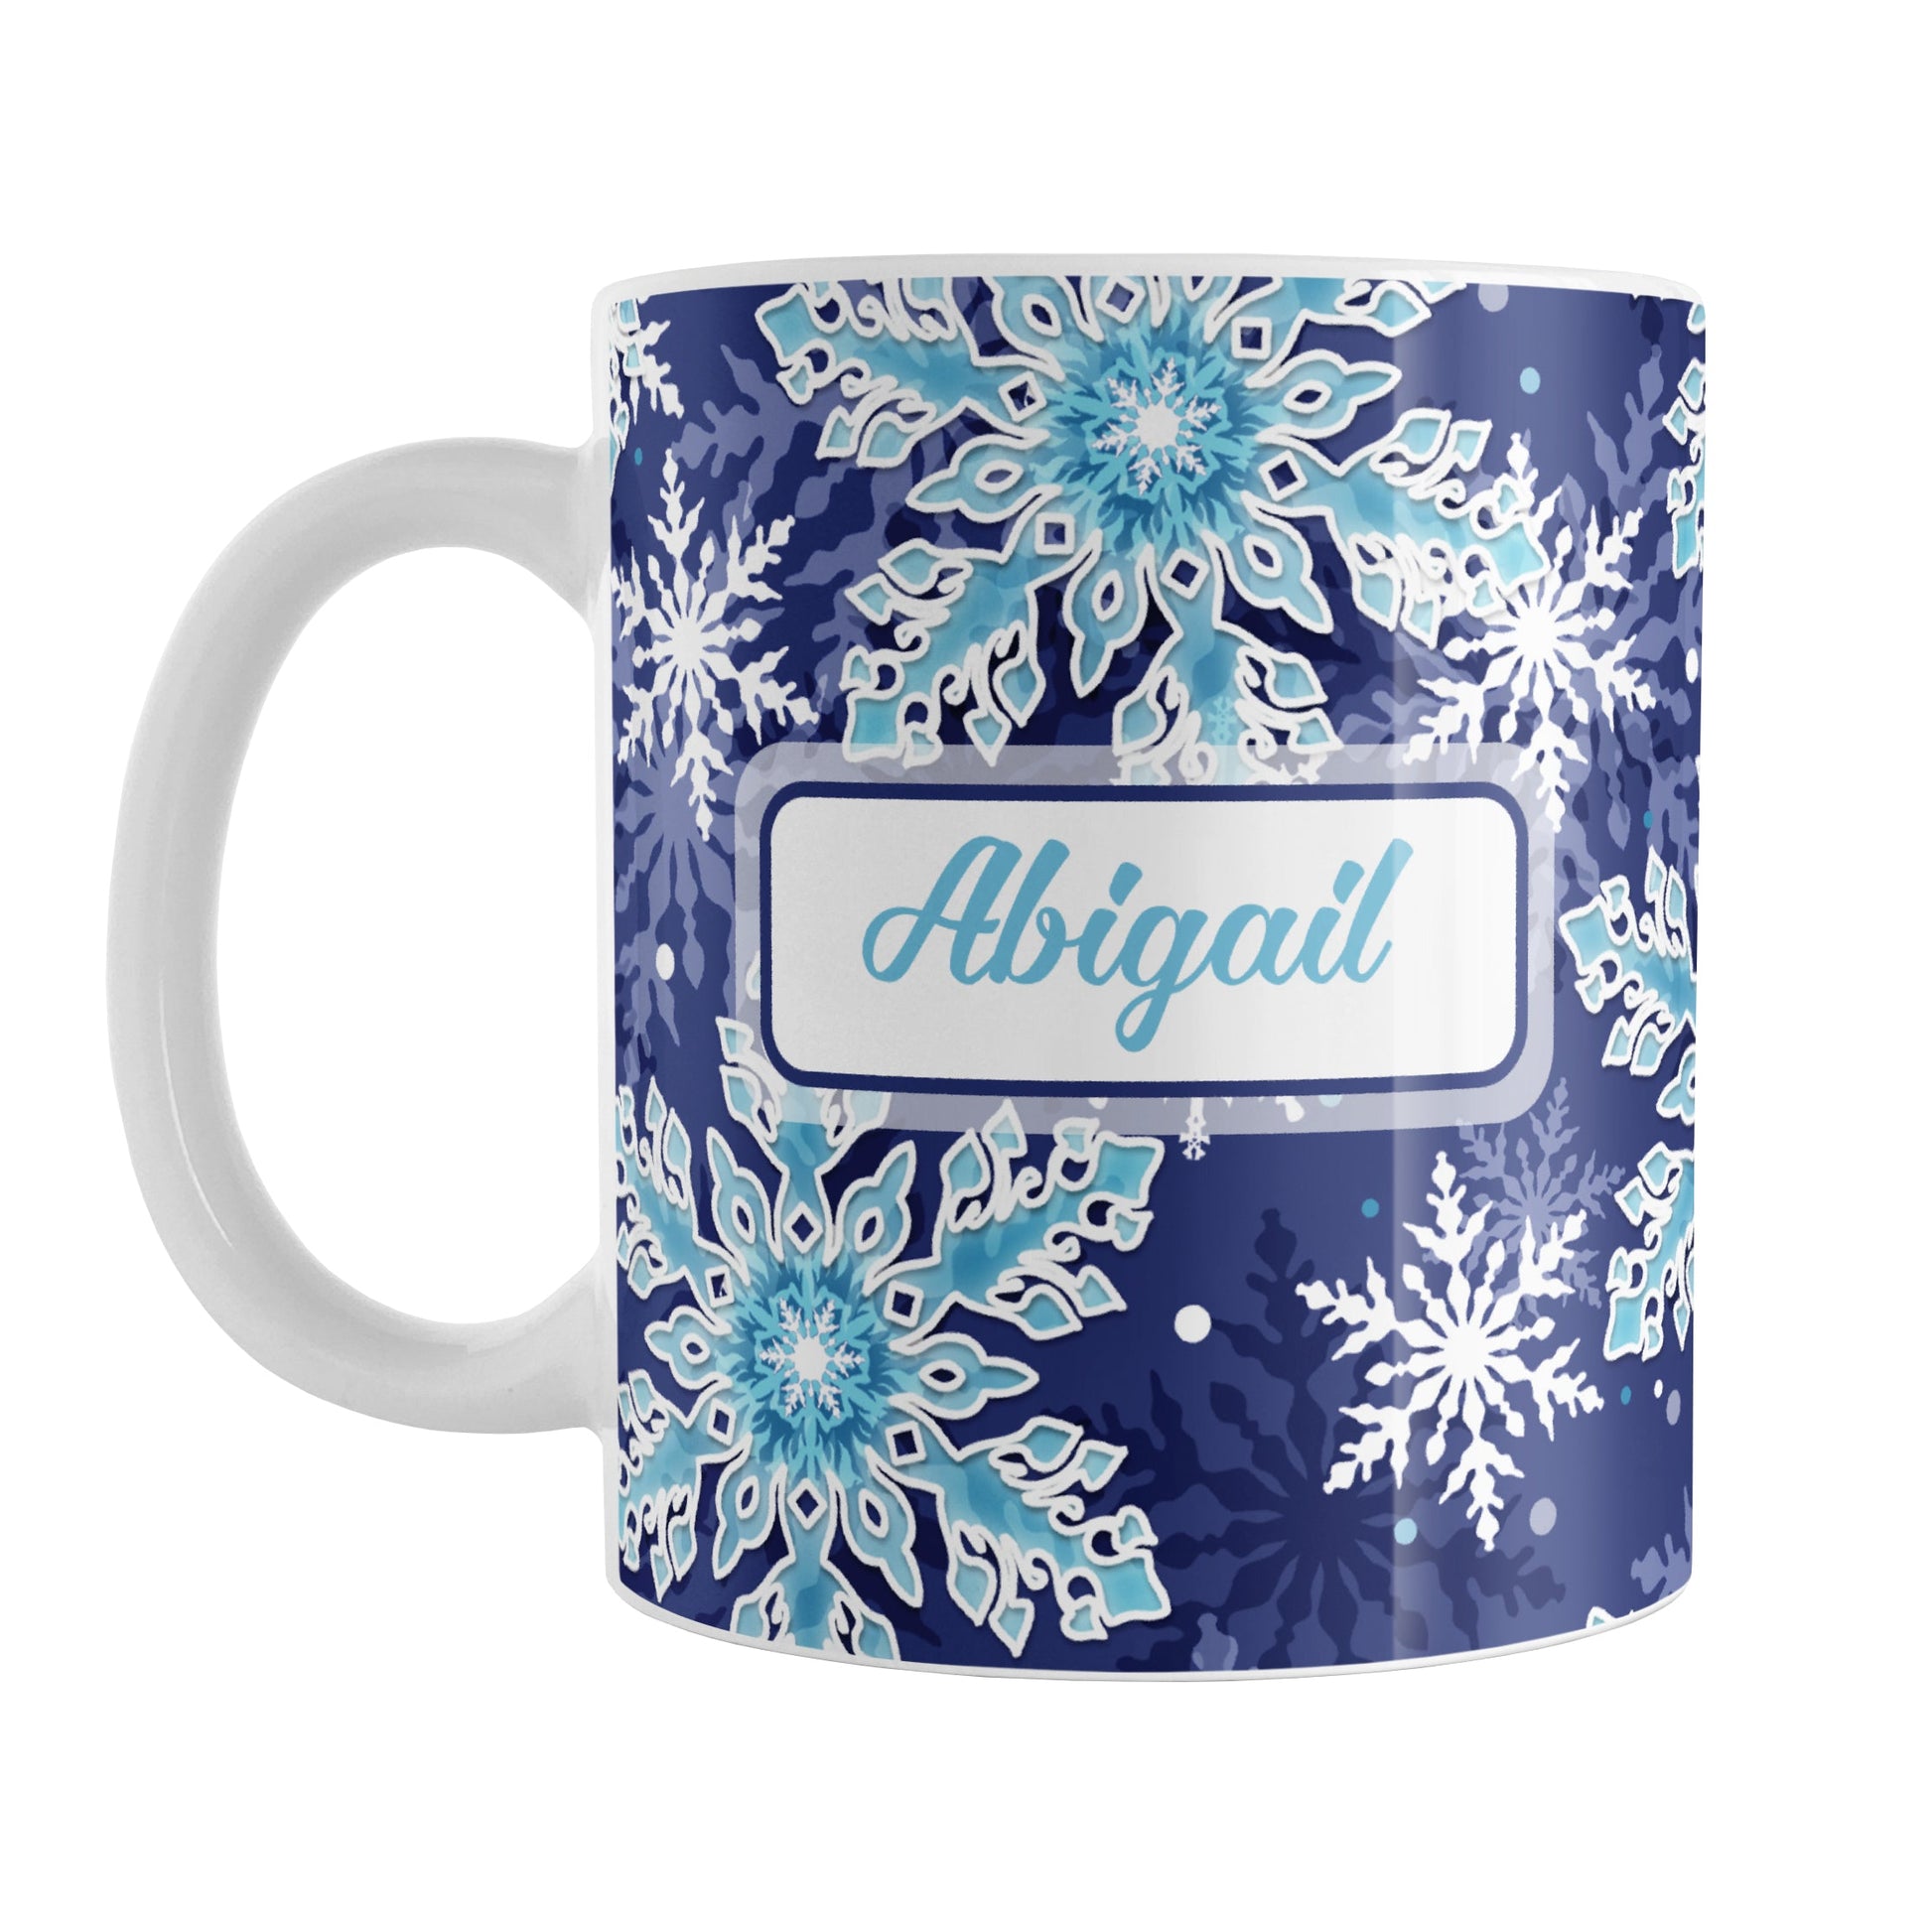 Personalized Navy Blue Aqua Snowflake Winter Mug (11oz) at Amy's Coffee Mugs. A ceramic coffee mug designed with a pattern of aqua blue and white snowflakes over a navy blue background color that wraps around the mug to the handle. 